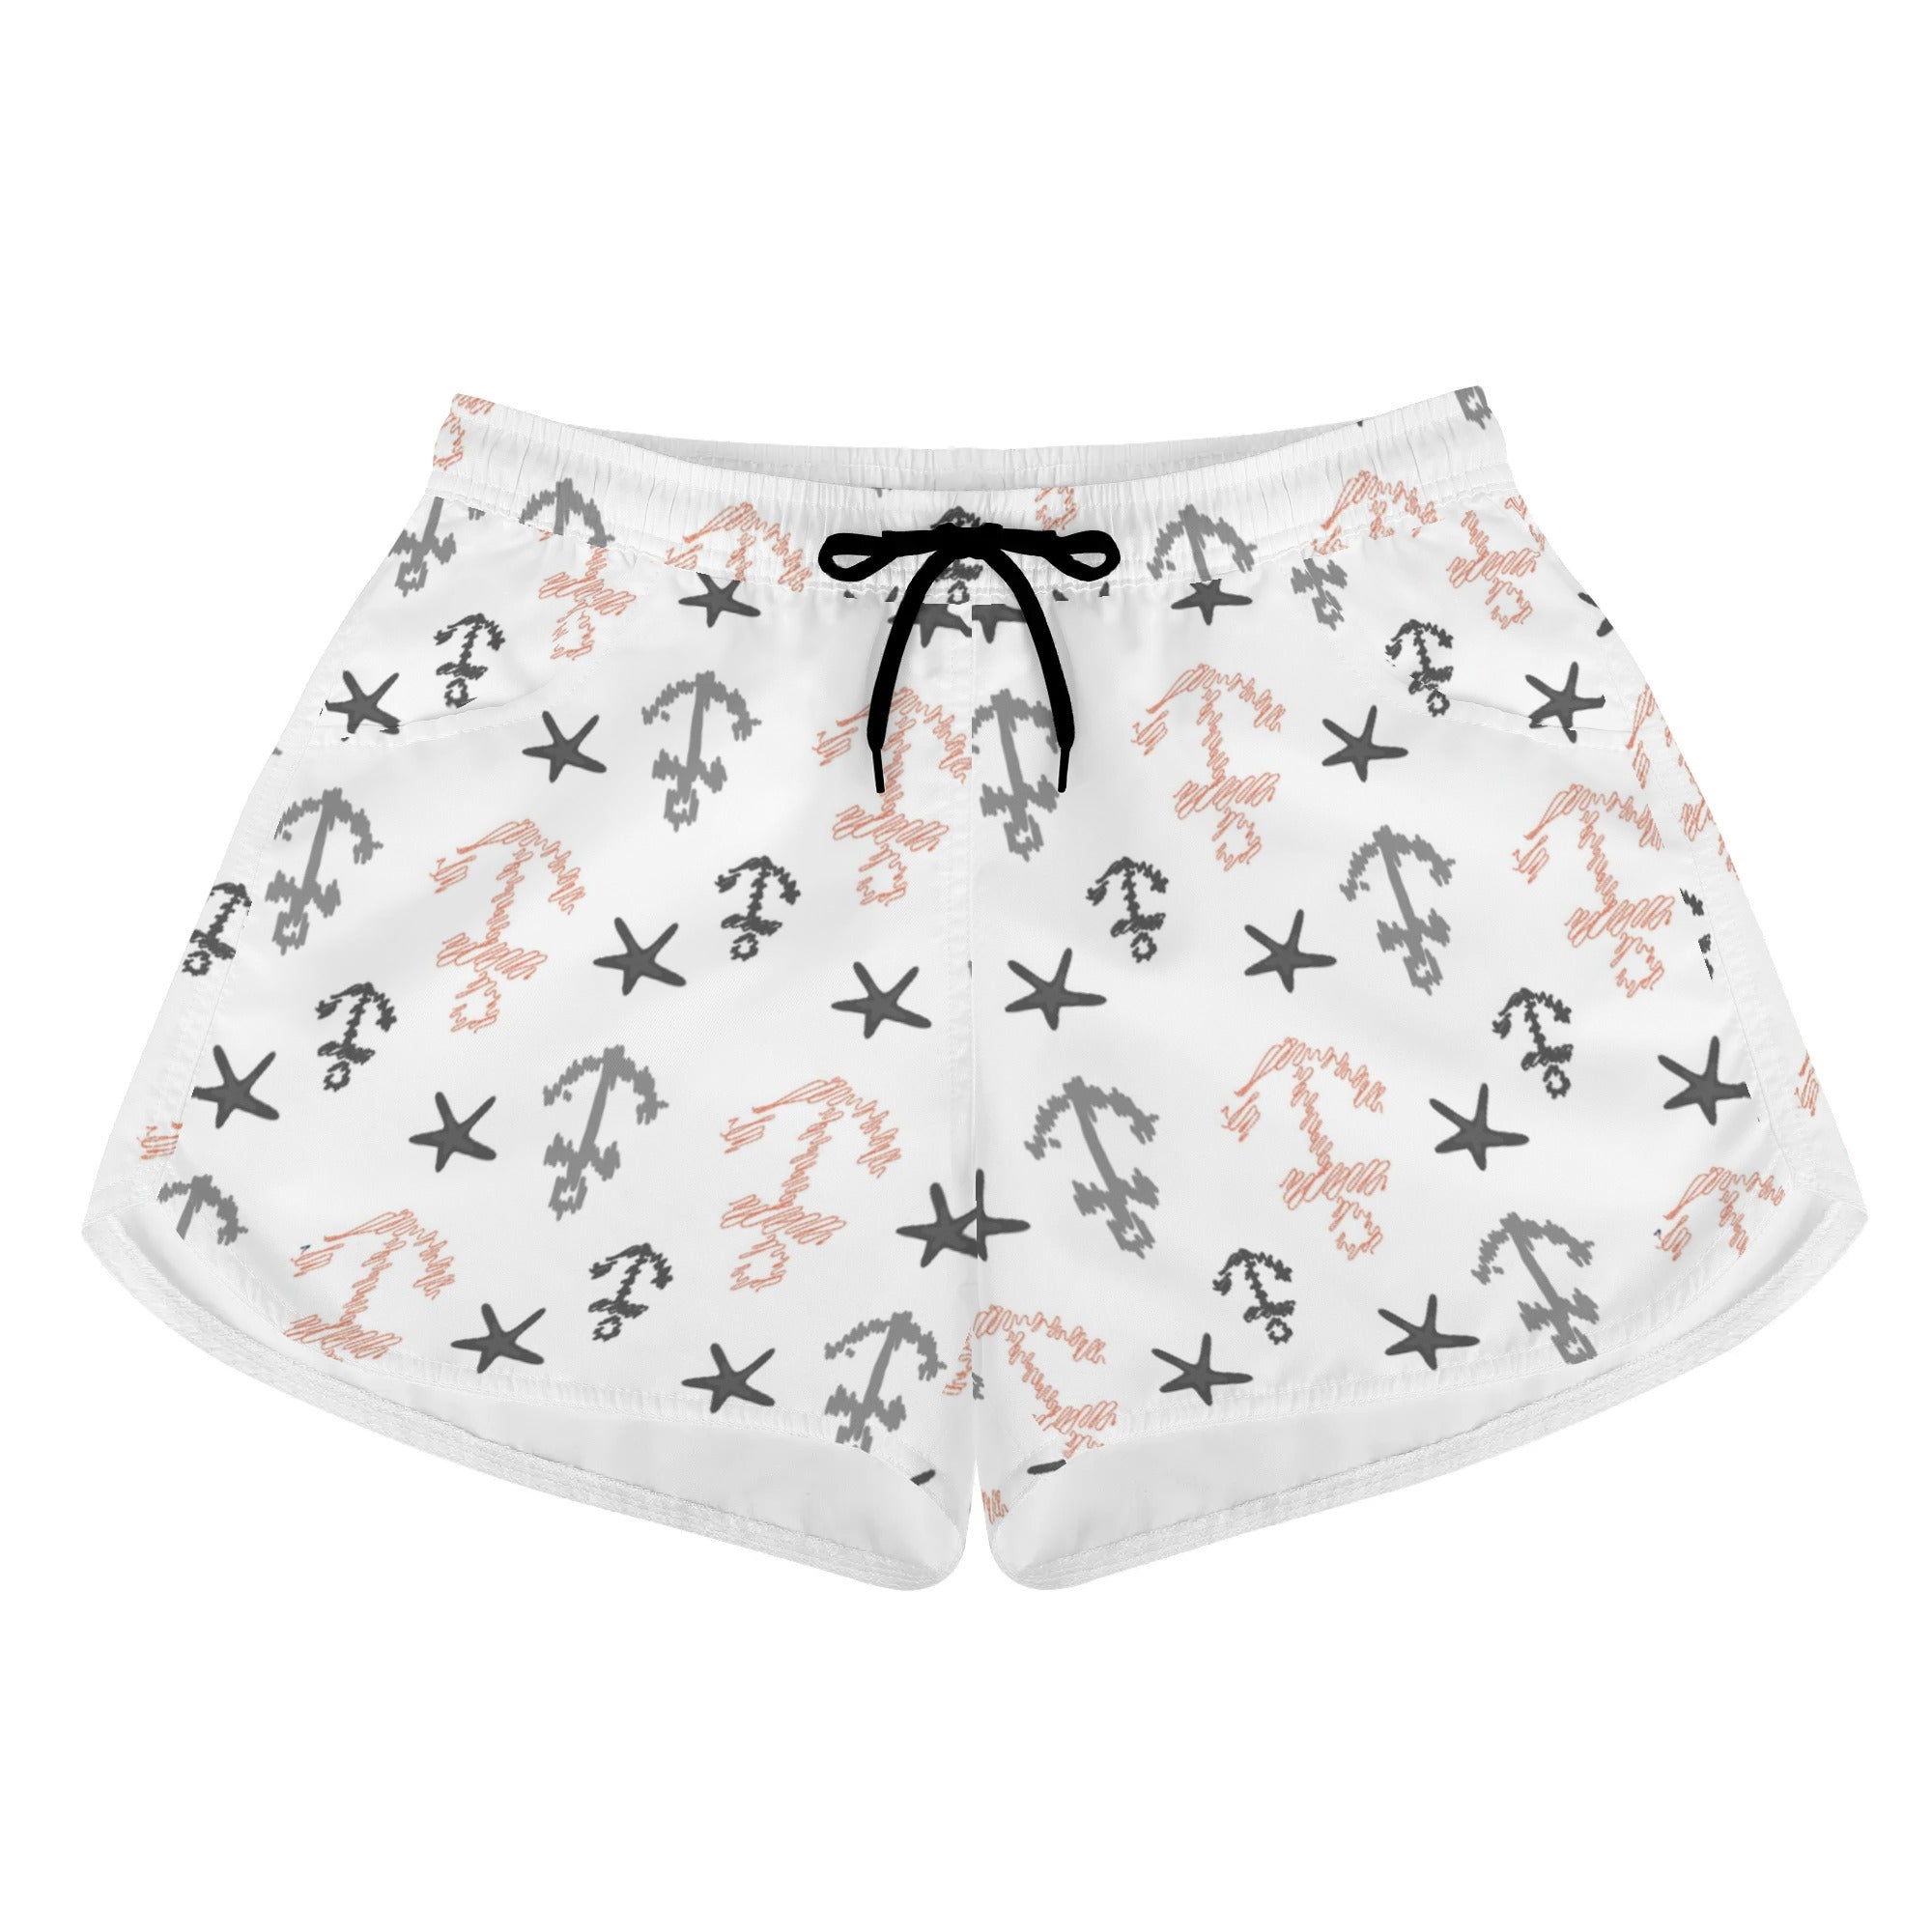 Womens Printed Beach Shorts - Scratched Anchors